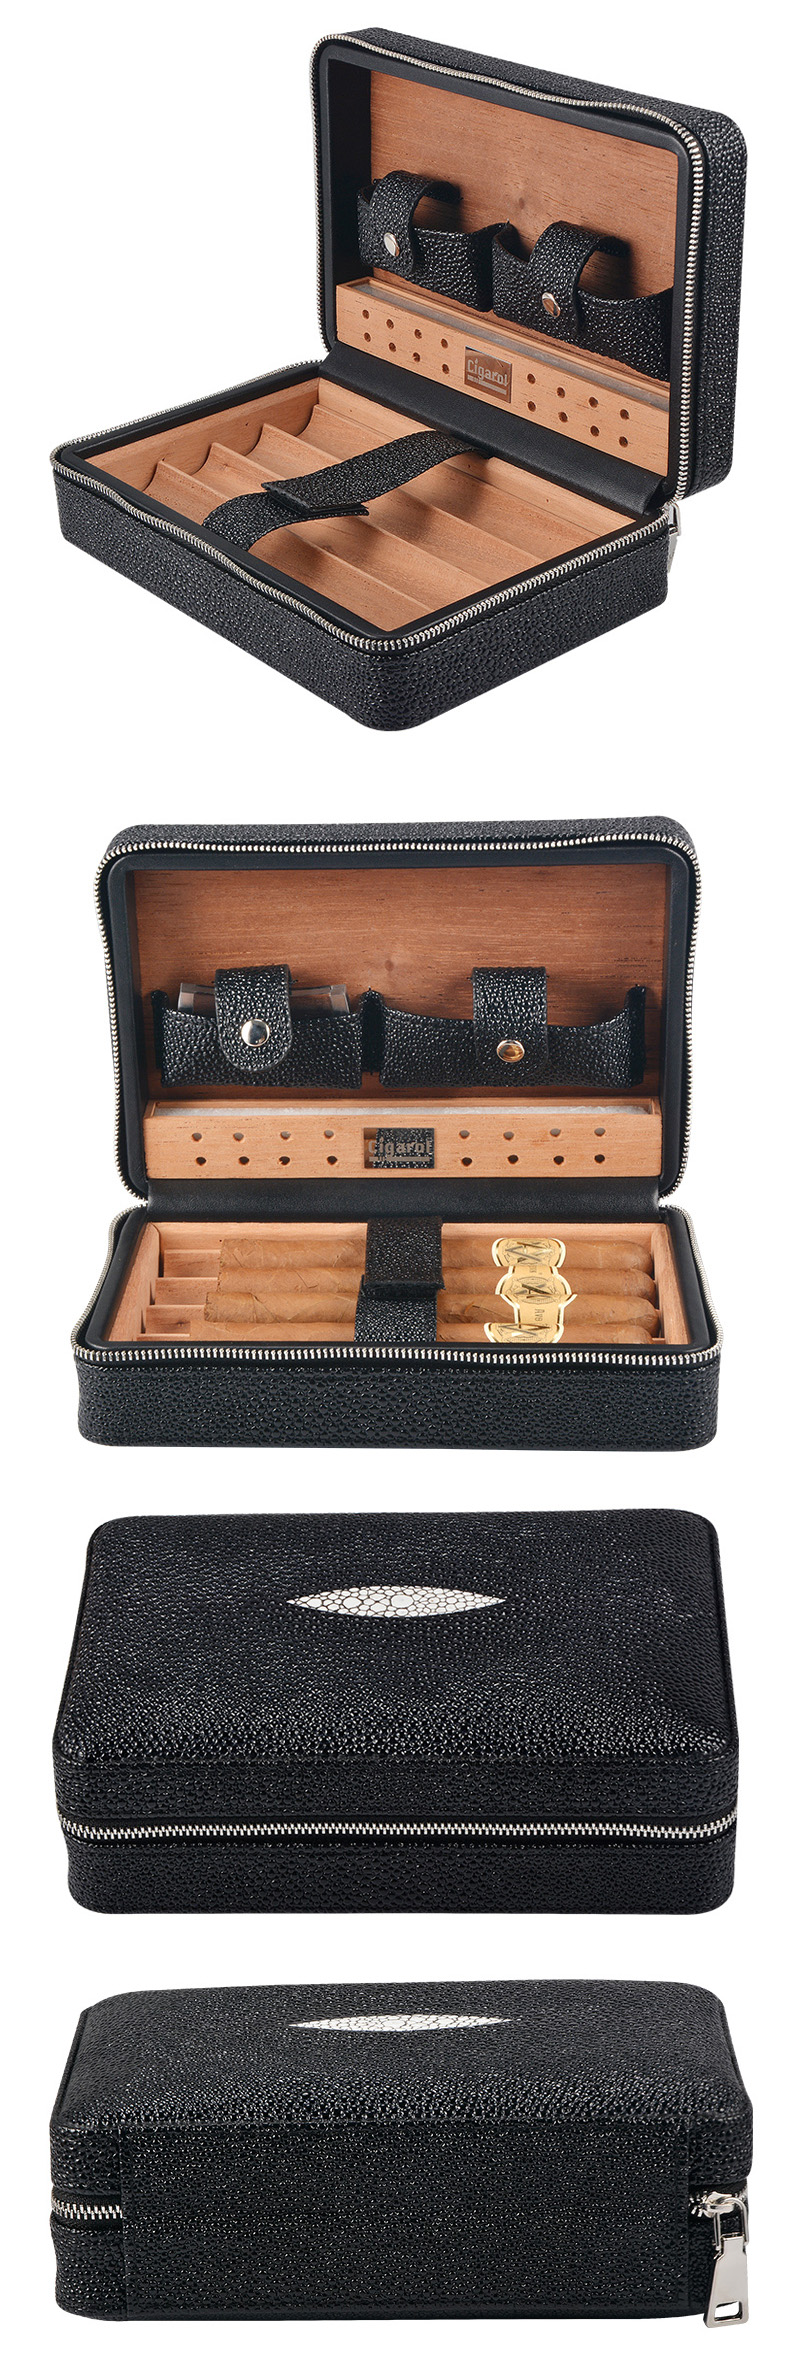 Wholesale 4 CT Black Leather Travel Cigar Humidor